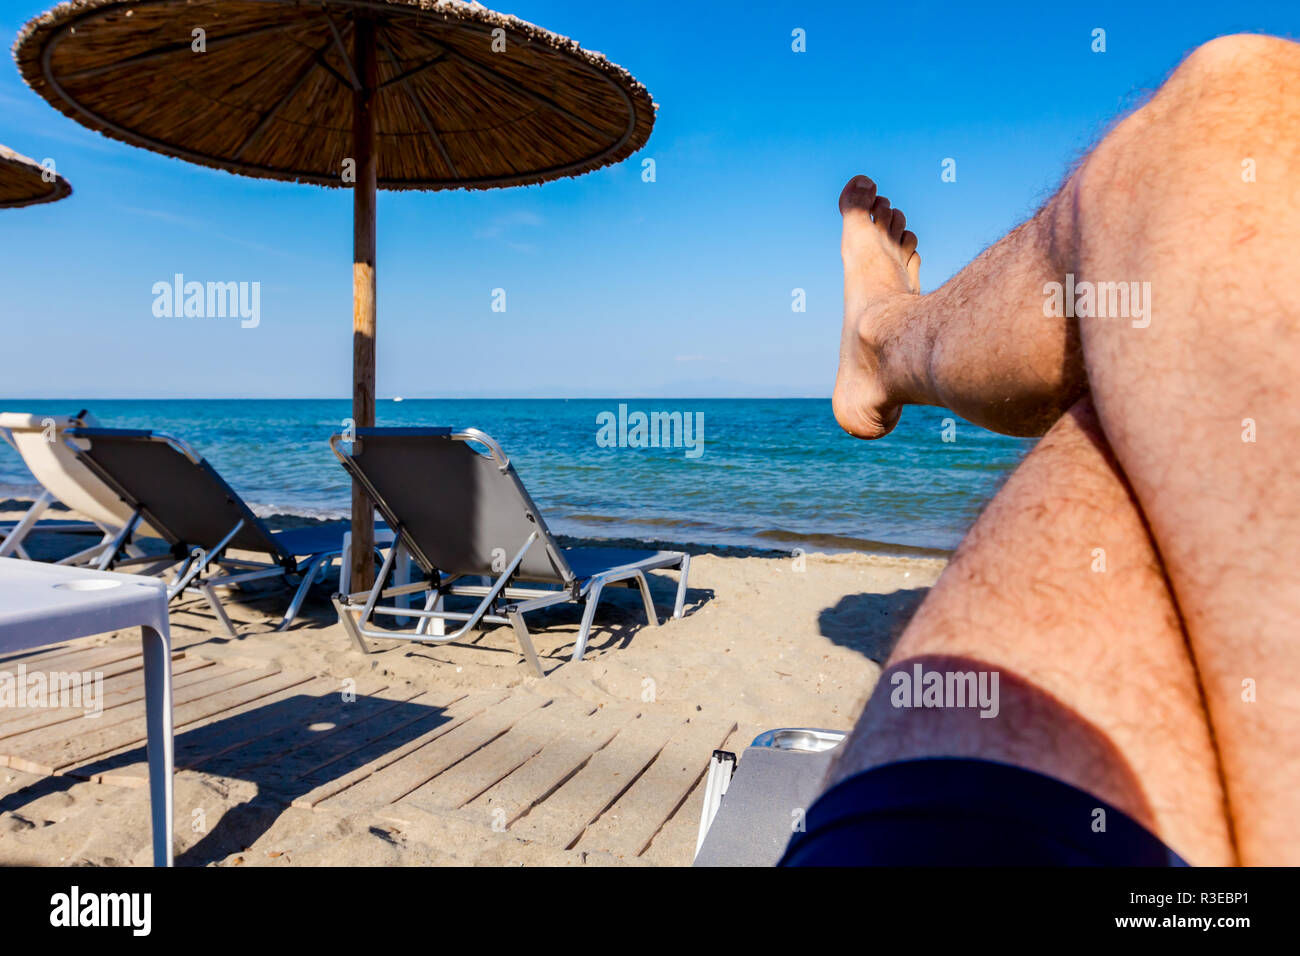 Man's legs until is sunbathing by lying carefree in lounger next to the coastline, on public beach. Stock Photo